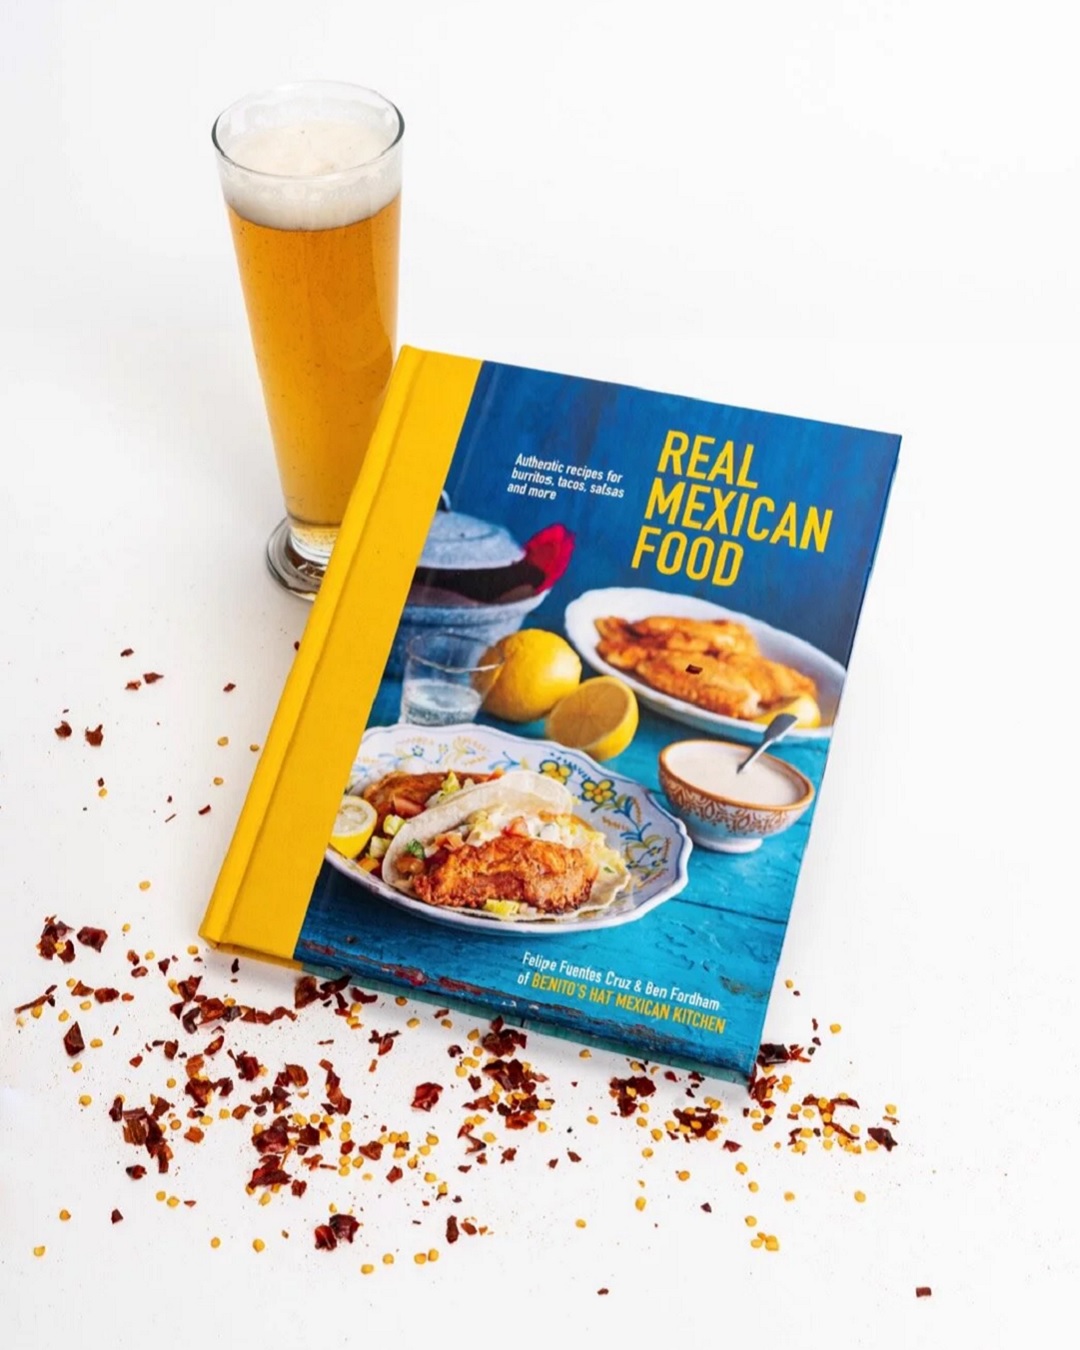 Real Mexican Food cookbook with a glass of beer and chilli flakes